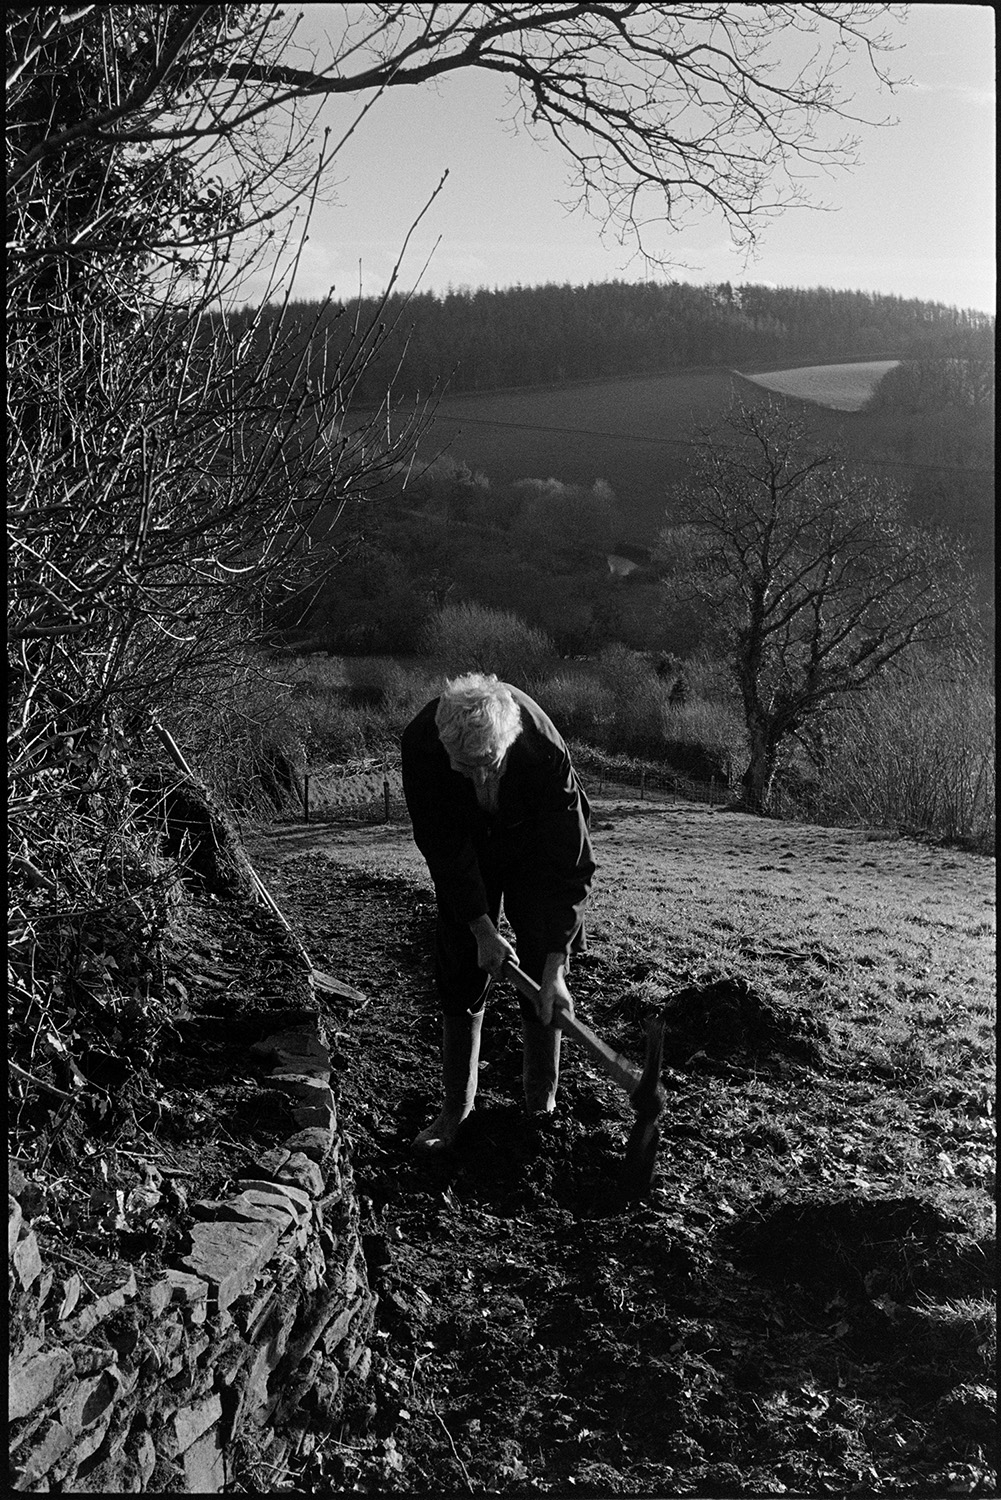 Man building hedge bank, putting earth on dry stone wall. 
[Geoff Darch building up a hedgebank by putting earth on top of a dry stone wall, in a field at Chulmleigh. He is using a pickaxe to break up the earth.]